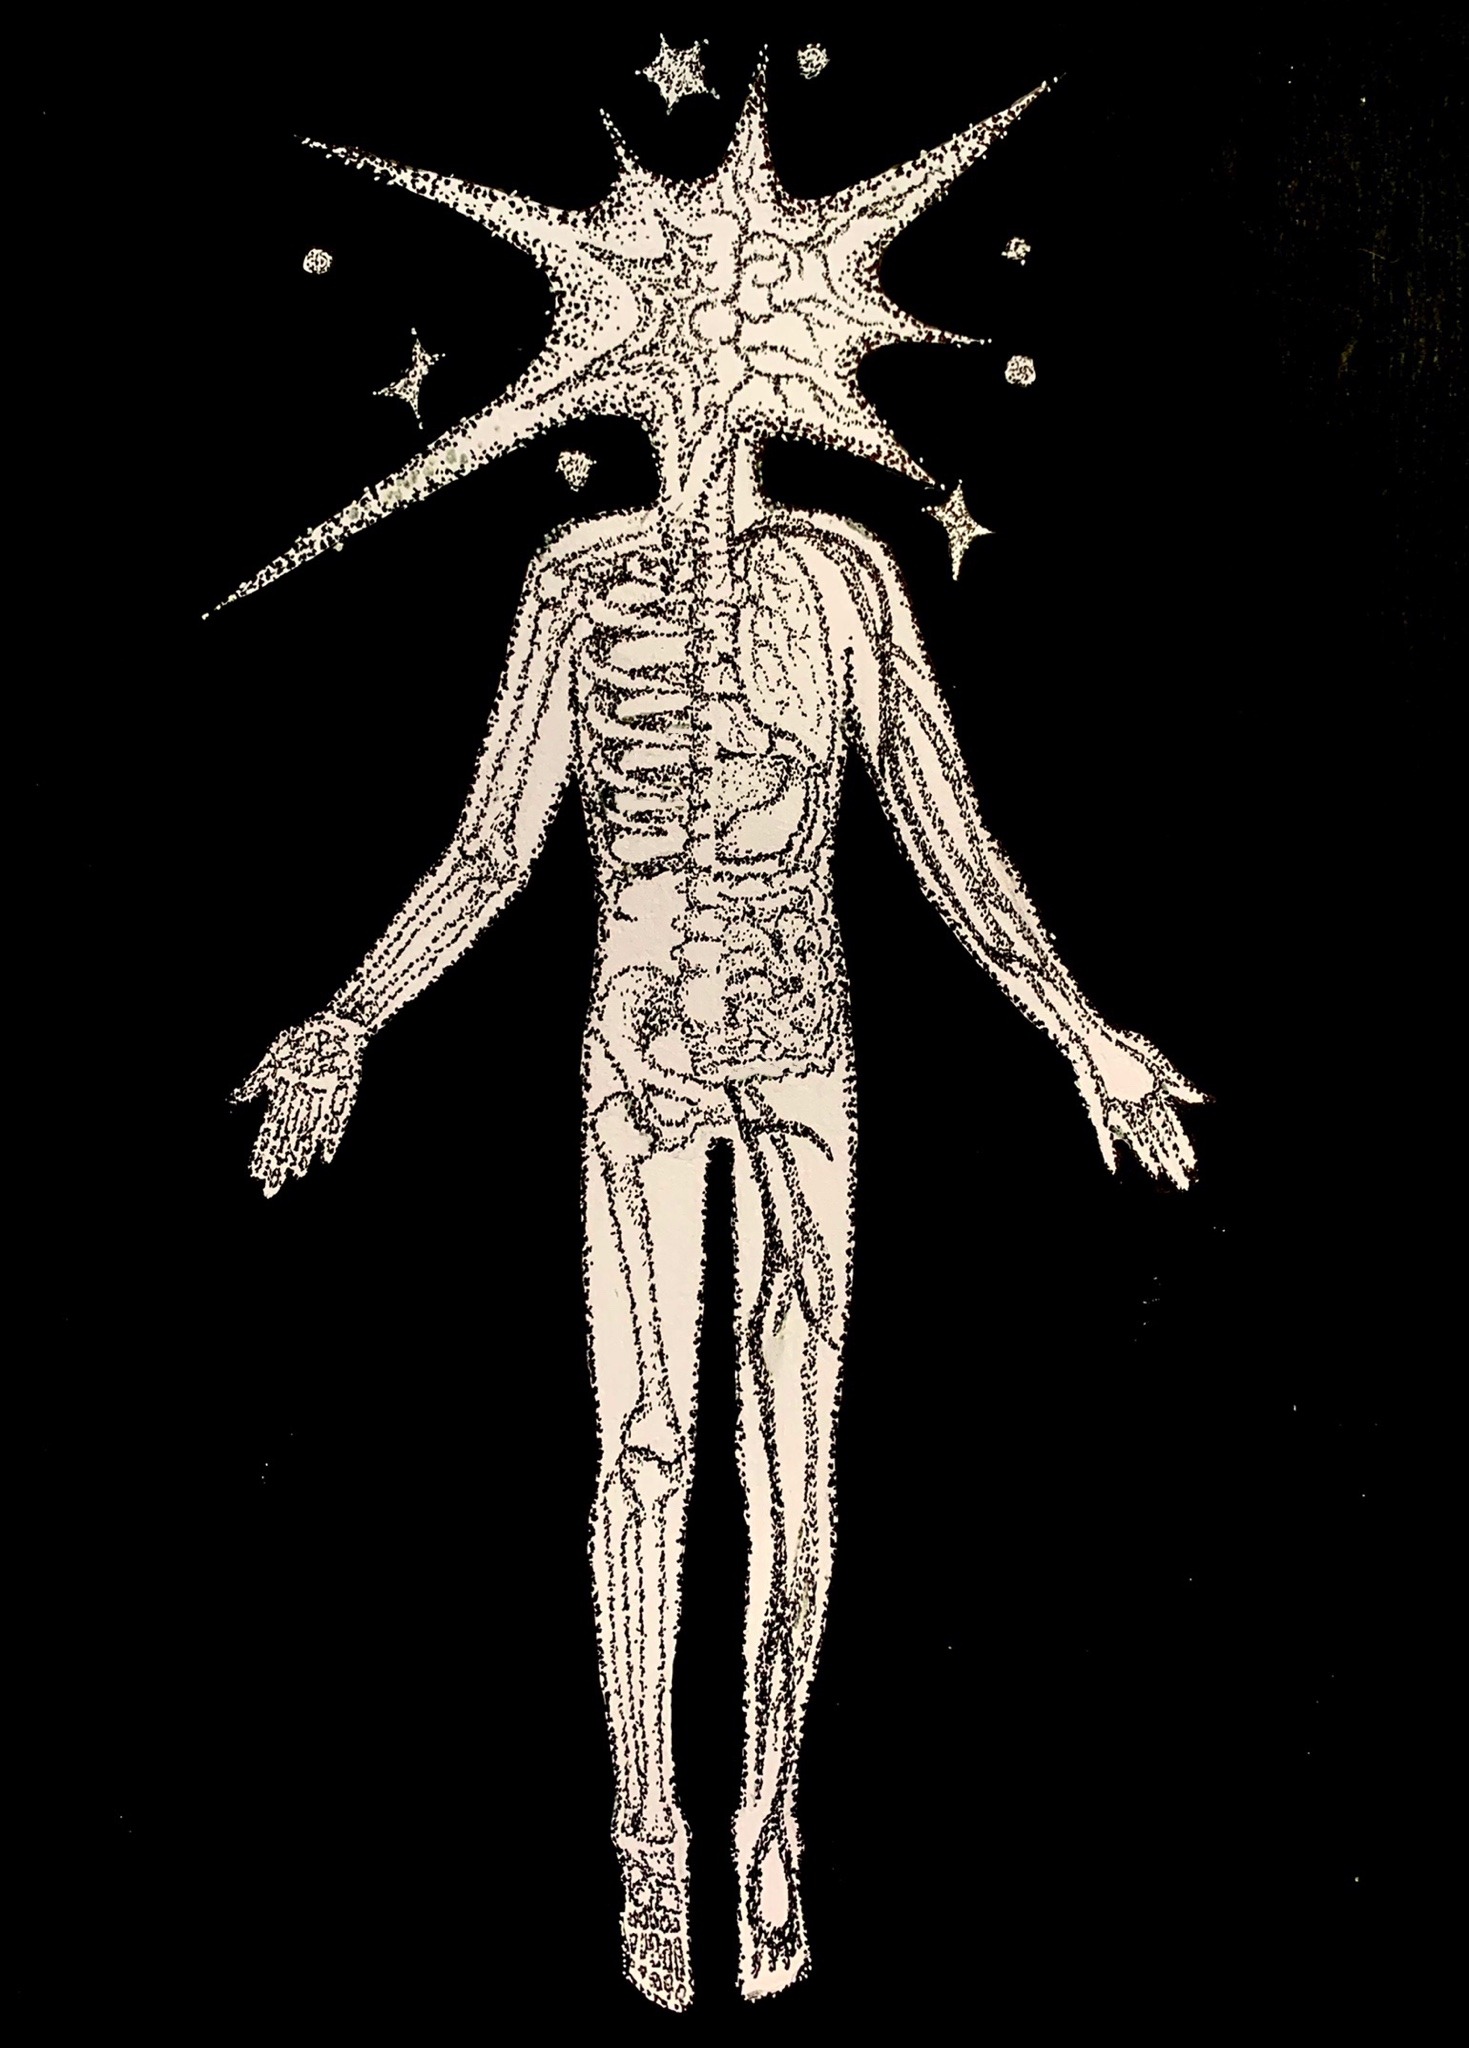 an illustration on a black background of a white figure with a starburst shaped head. the figure is floating with its legs straight and its arms slightly spread, palms forward. within the figure, black stippling creates the skeleton on the left half and the organs and veins or nerves on the right. smaller stars float around the head.